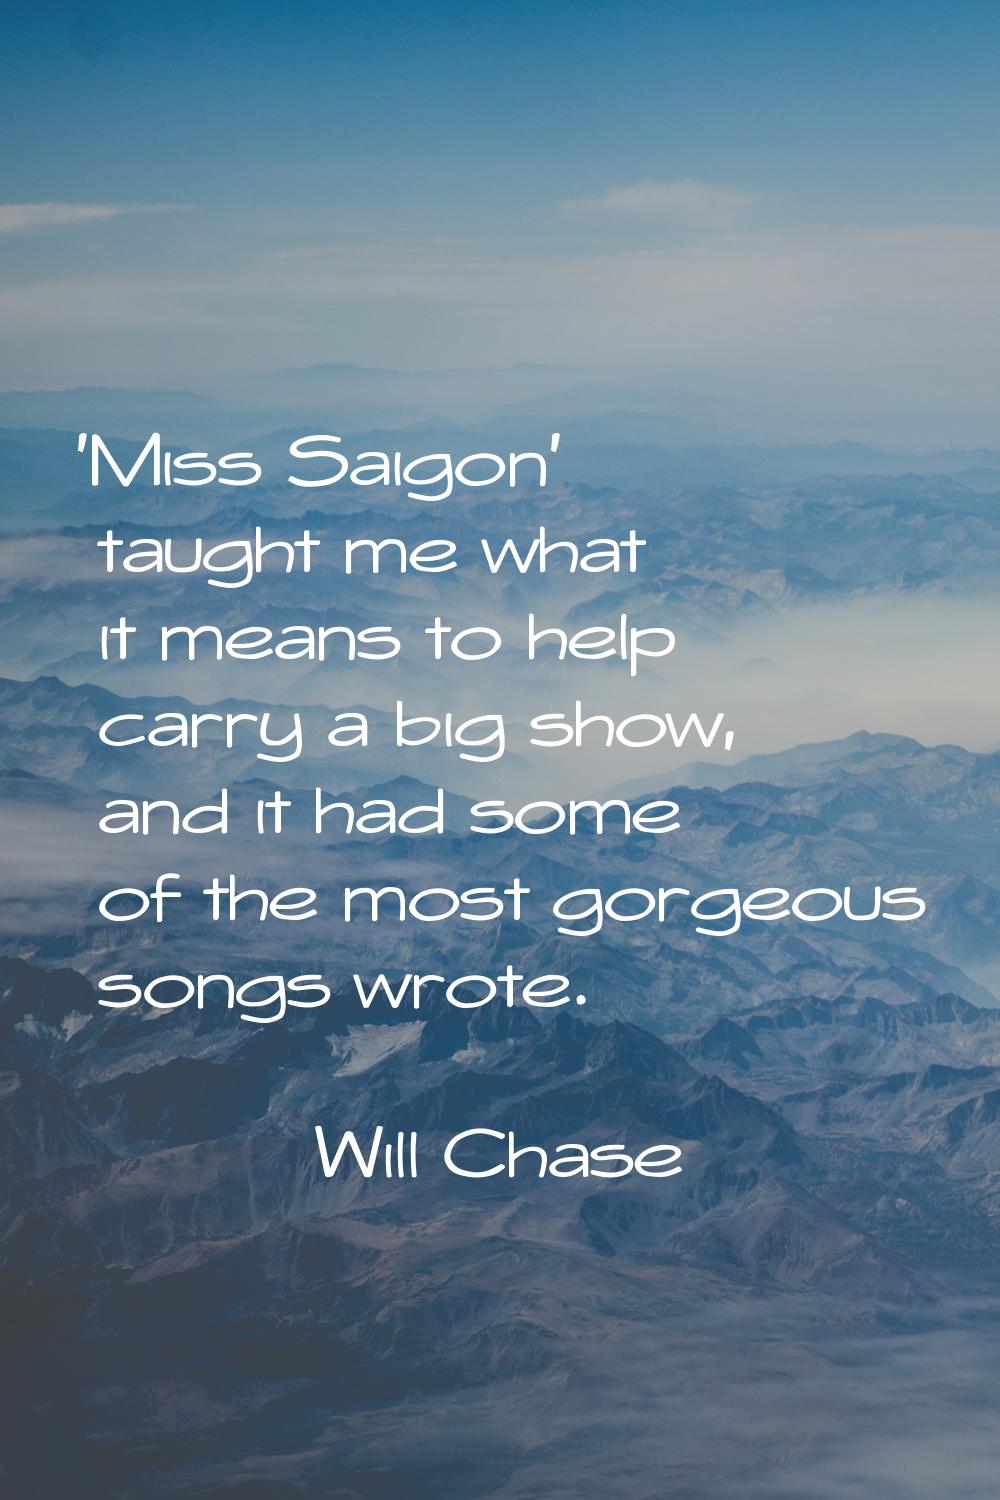 'Miss Saigon' taught me what it means to help carry a big show, and it had some of the most gorgeou